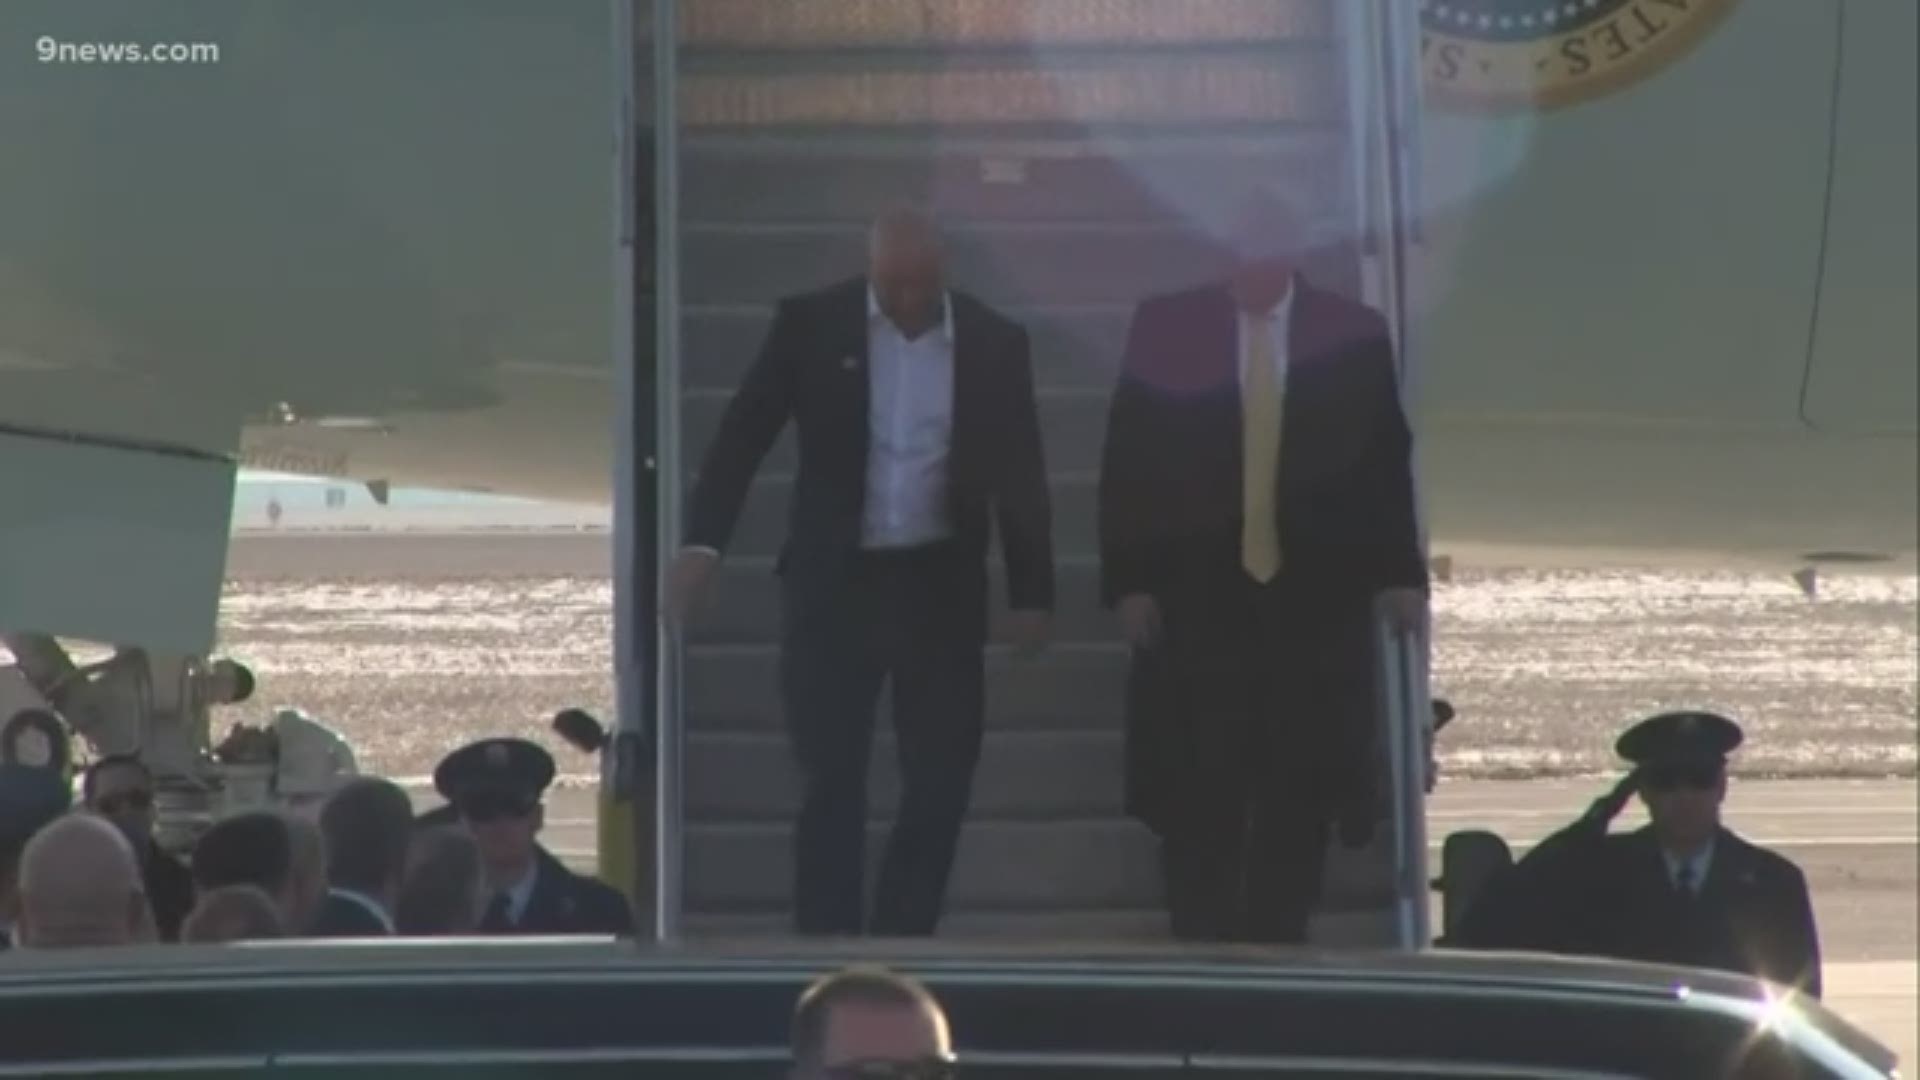 President Trump arrived aboard in Air Force One in Colorado Springs ahead of his rally where's he's expected to speak at 5 p.m.